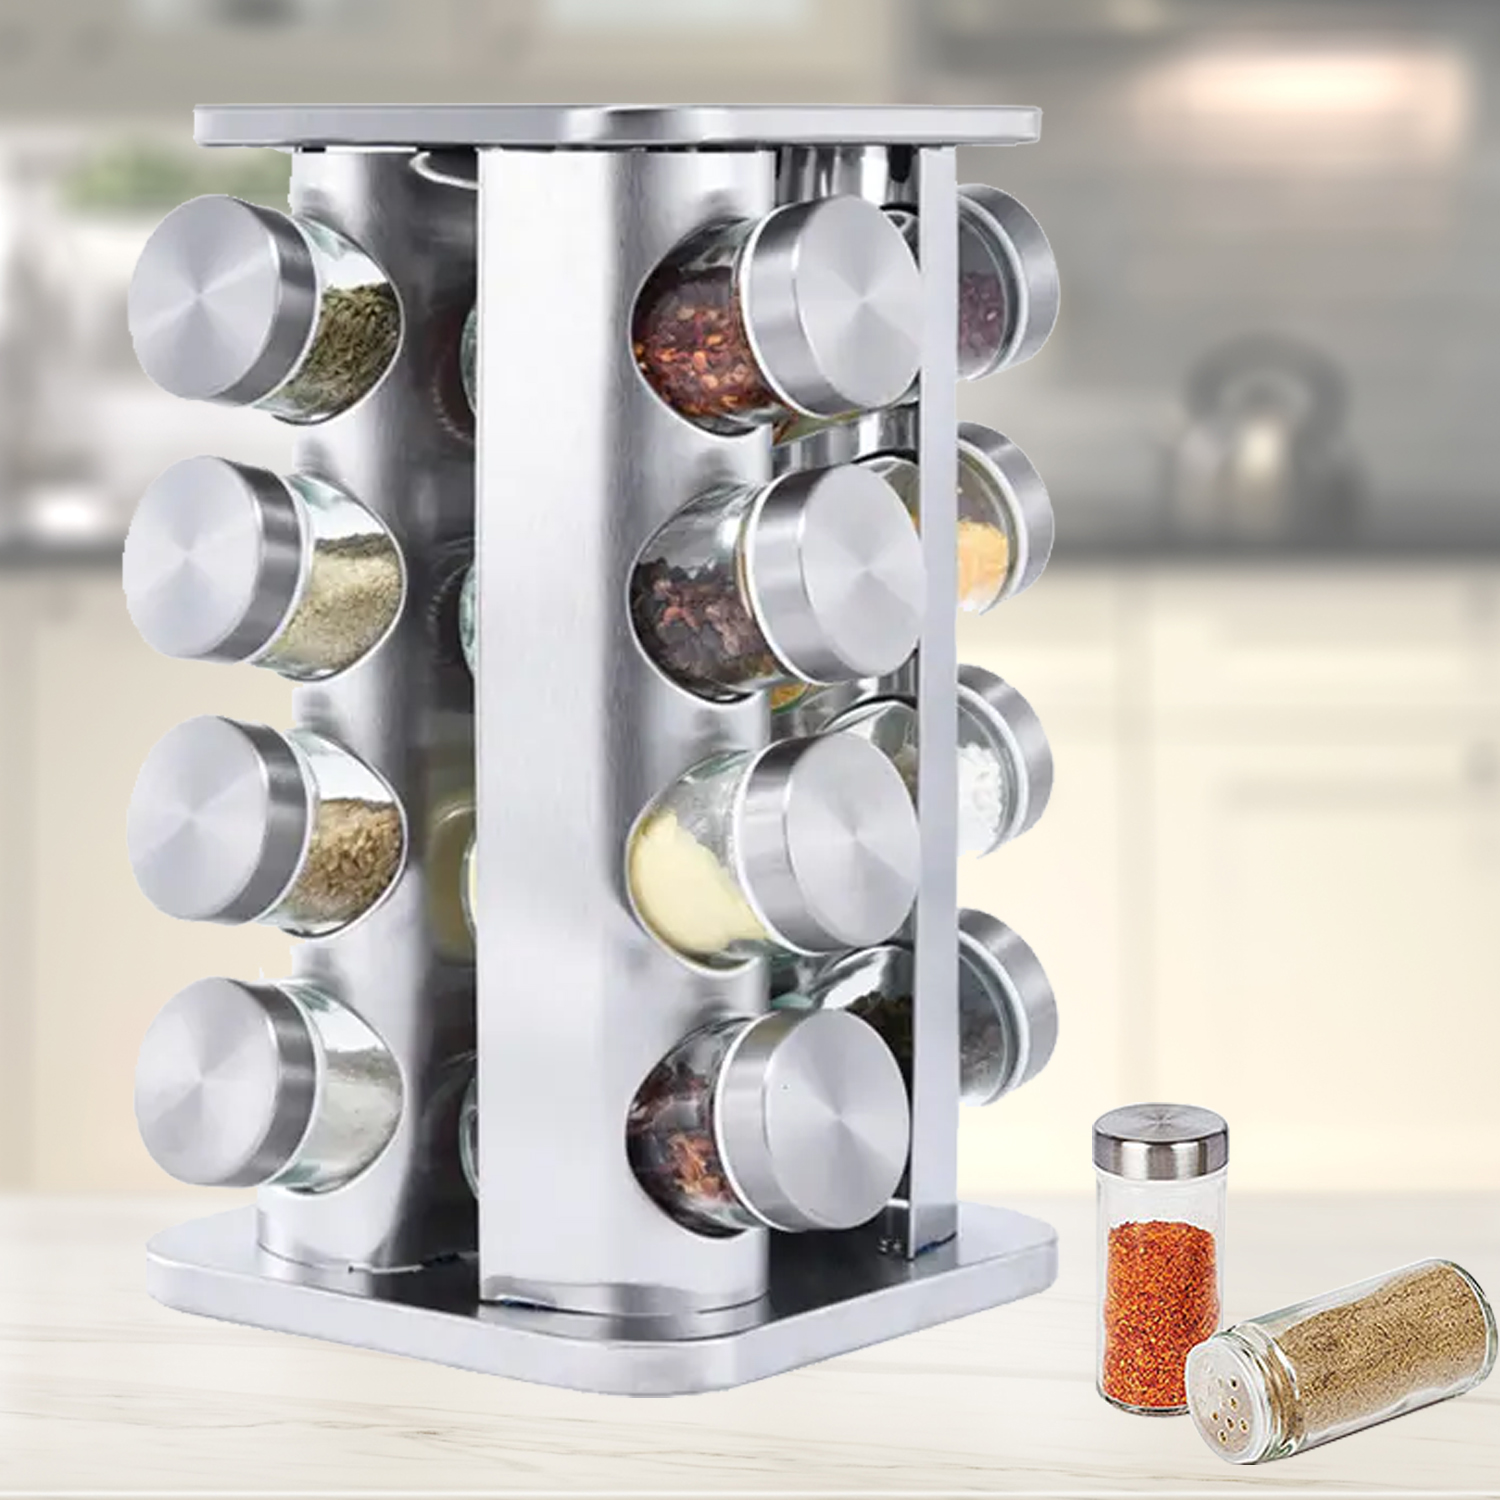 Stainless Steel Rotating Spice Organizer Rack Seasoning Bottle Jar Rack Moisture-proof Large Capacity 90ml Spice Jar With Rounded Square 360 Degrees Rotating Storage Rack Kitchen Gadget